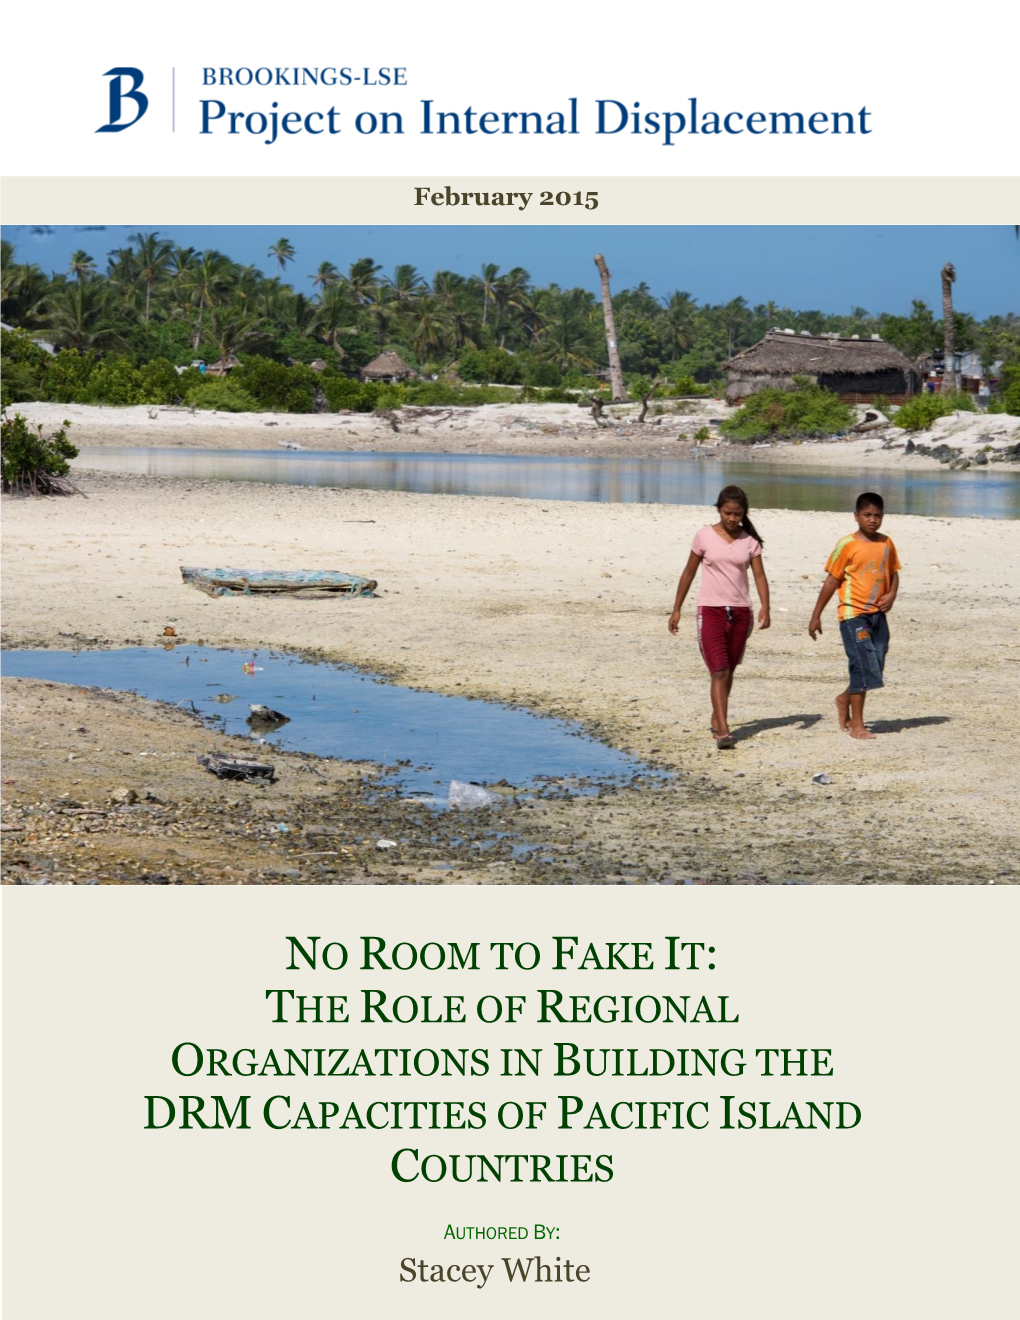 The Role of Regional Organizations in Building the Drm Capacities of Pacific Island Countries